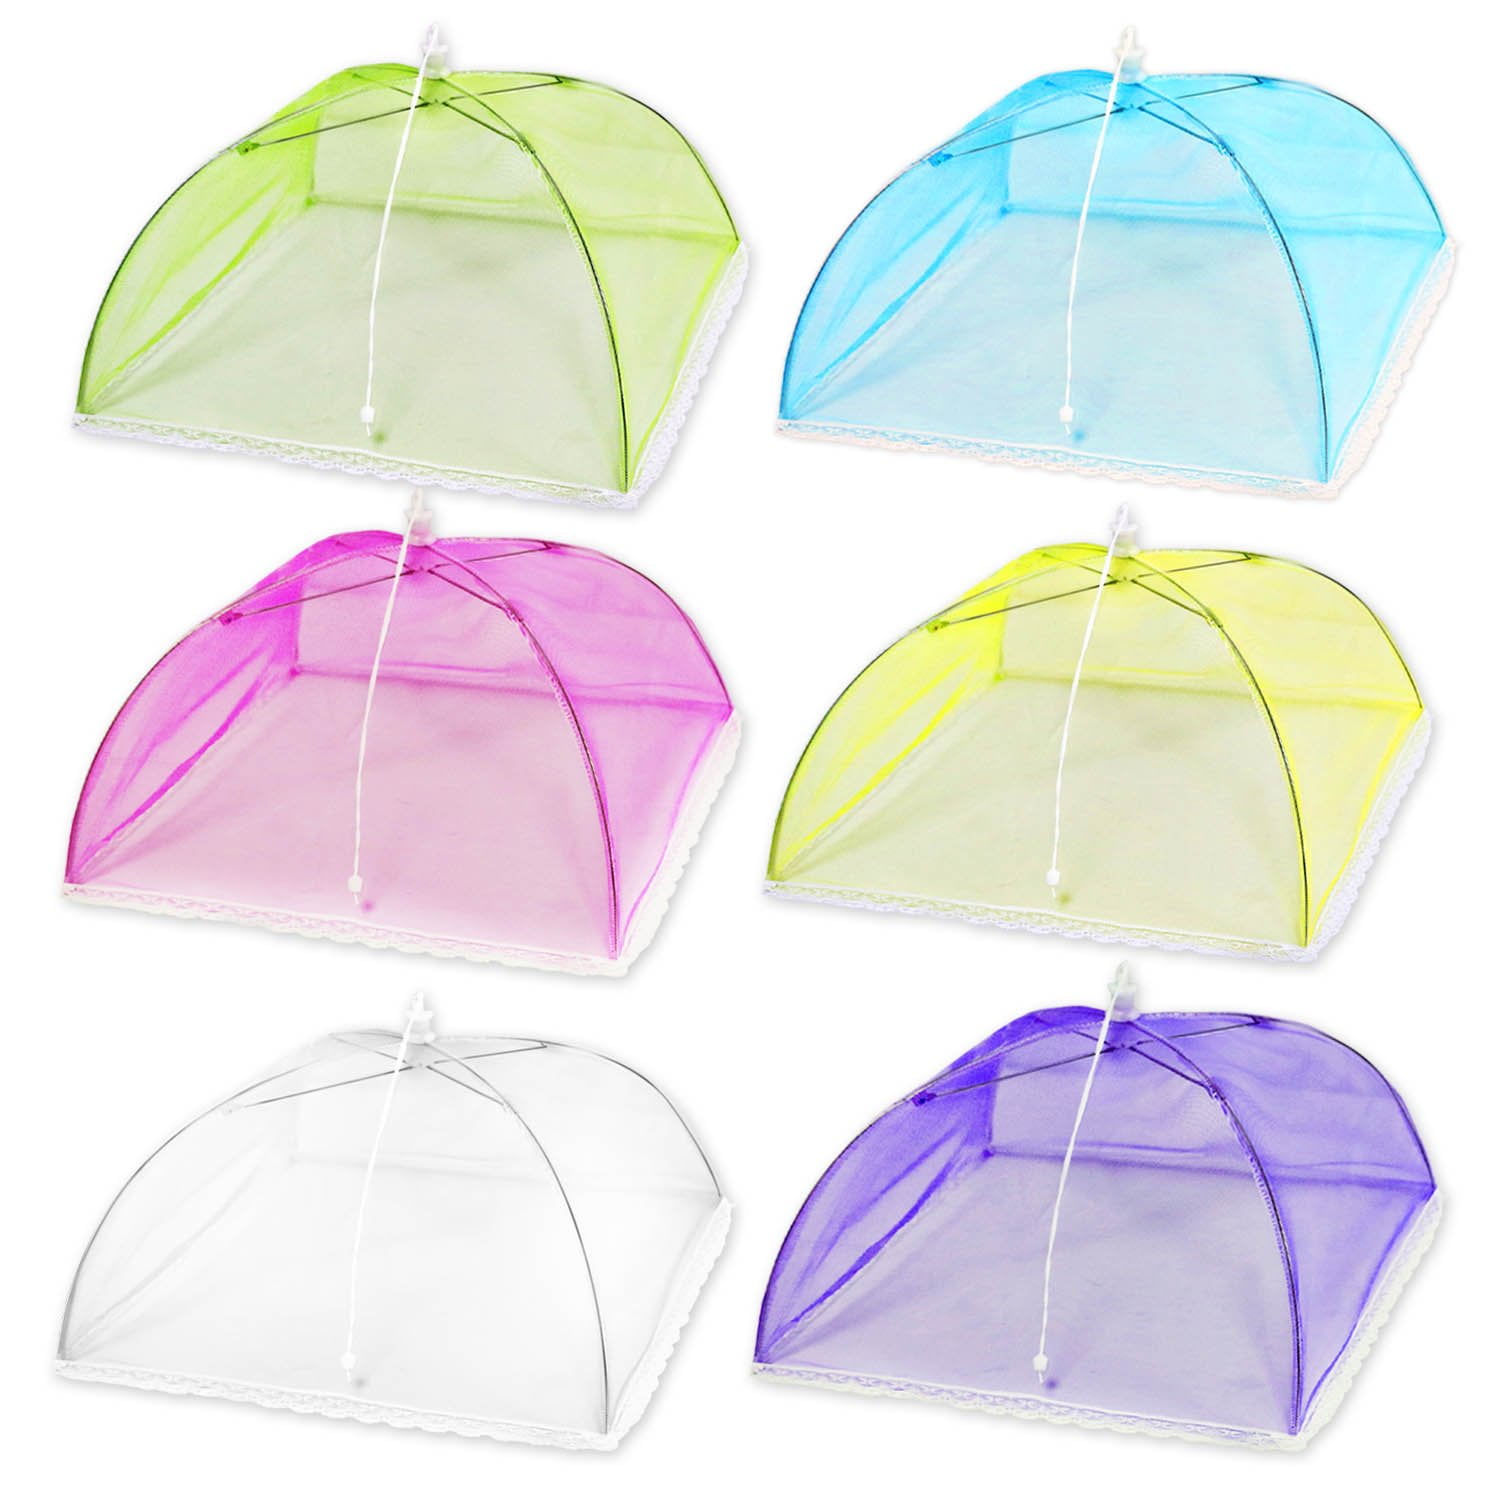 Fold Food Cover Tent Umbrella Collapsible Cake Covers Lace Mesh Net Insect New